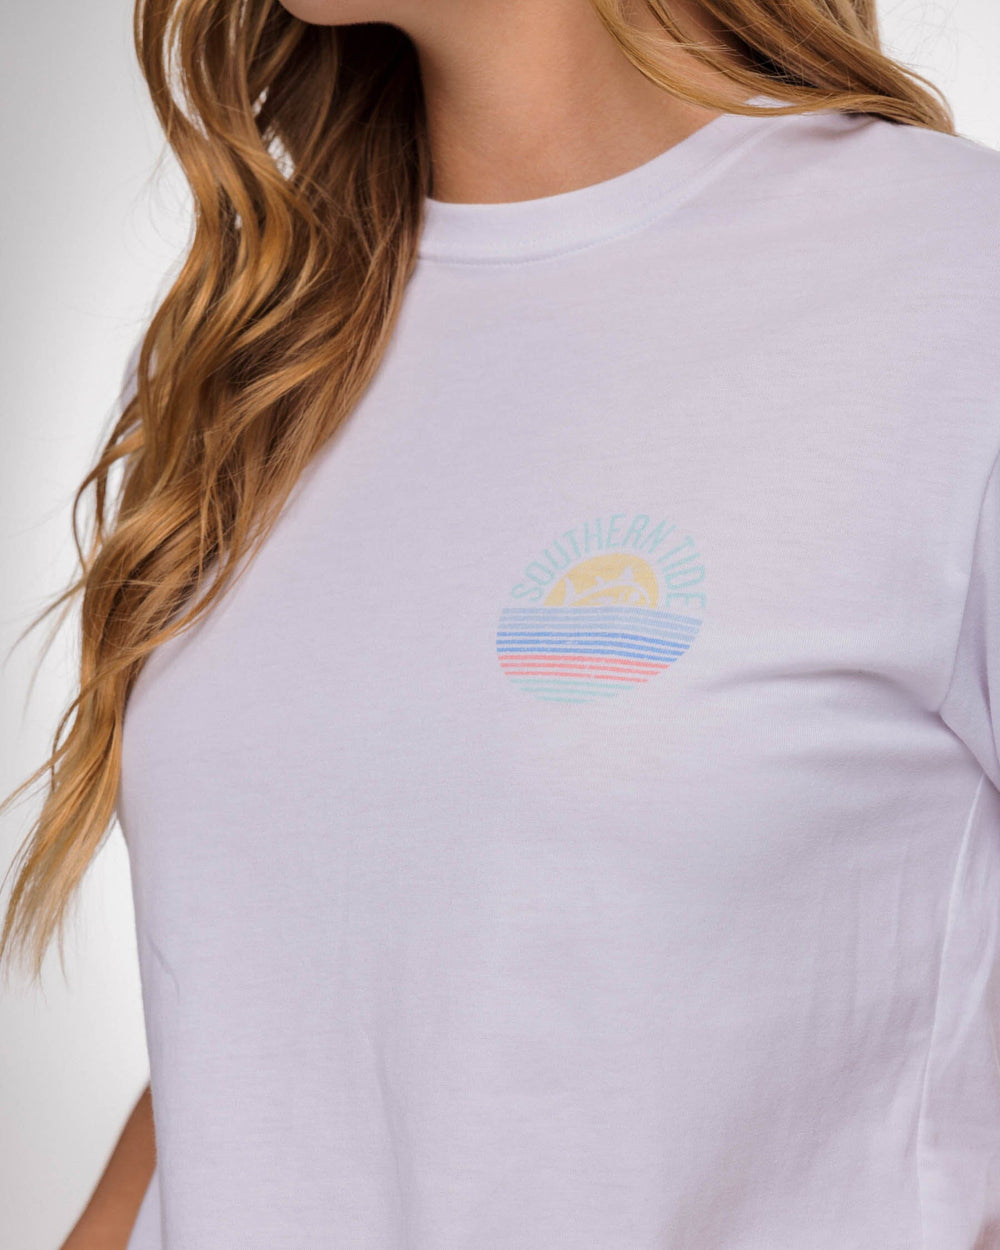 The detail view of the Southern Tide Striped Sunset Circle T-Shirt by Southern Tide - Classic White